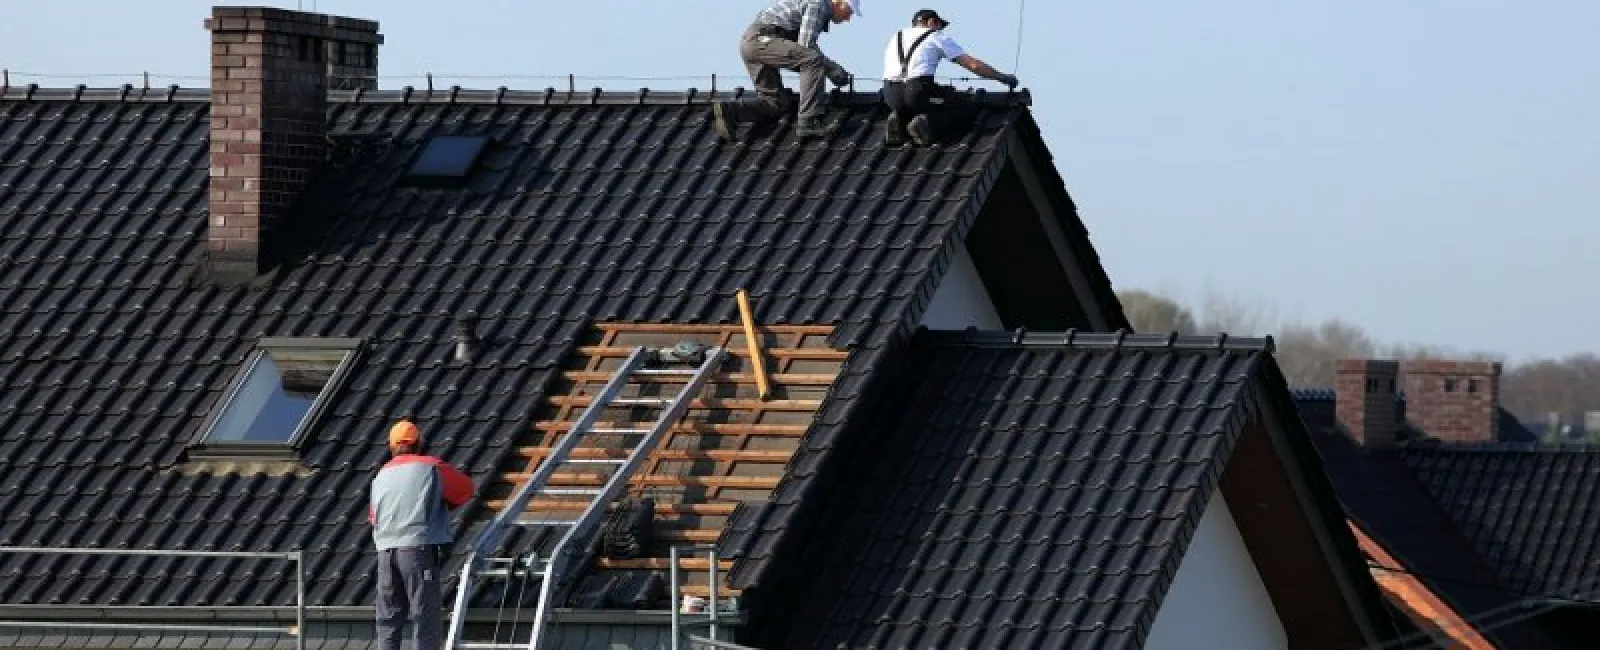 Tips to Minimize Your Roof Replacement Costs